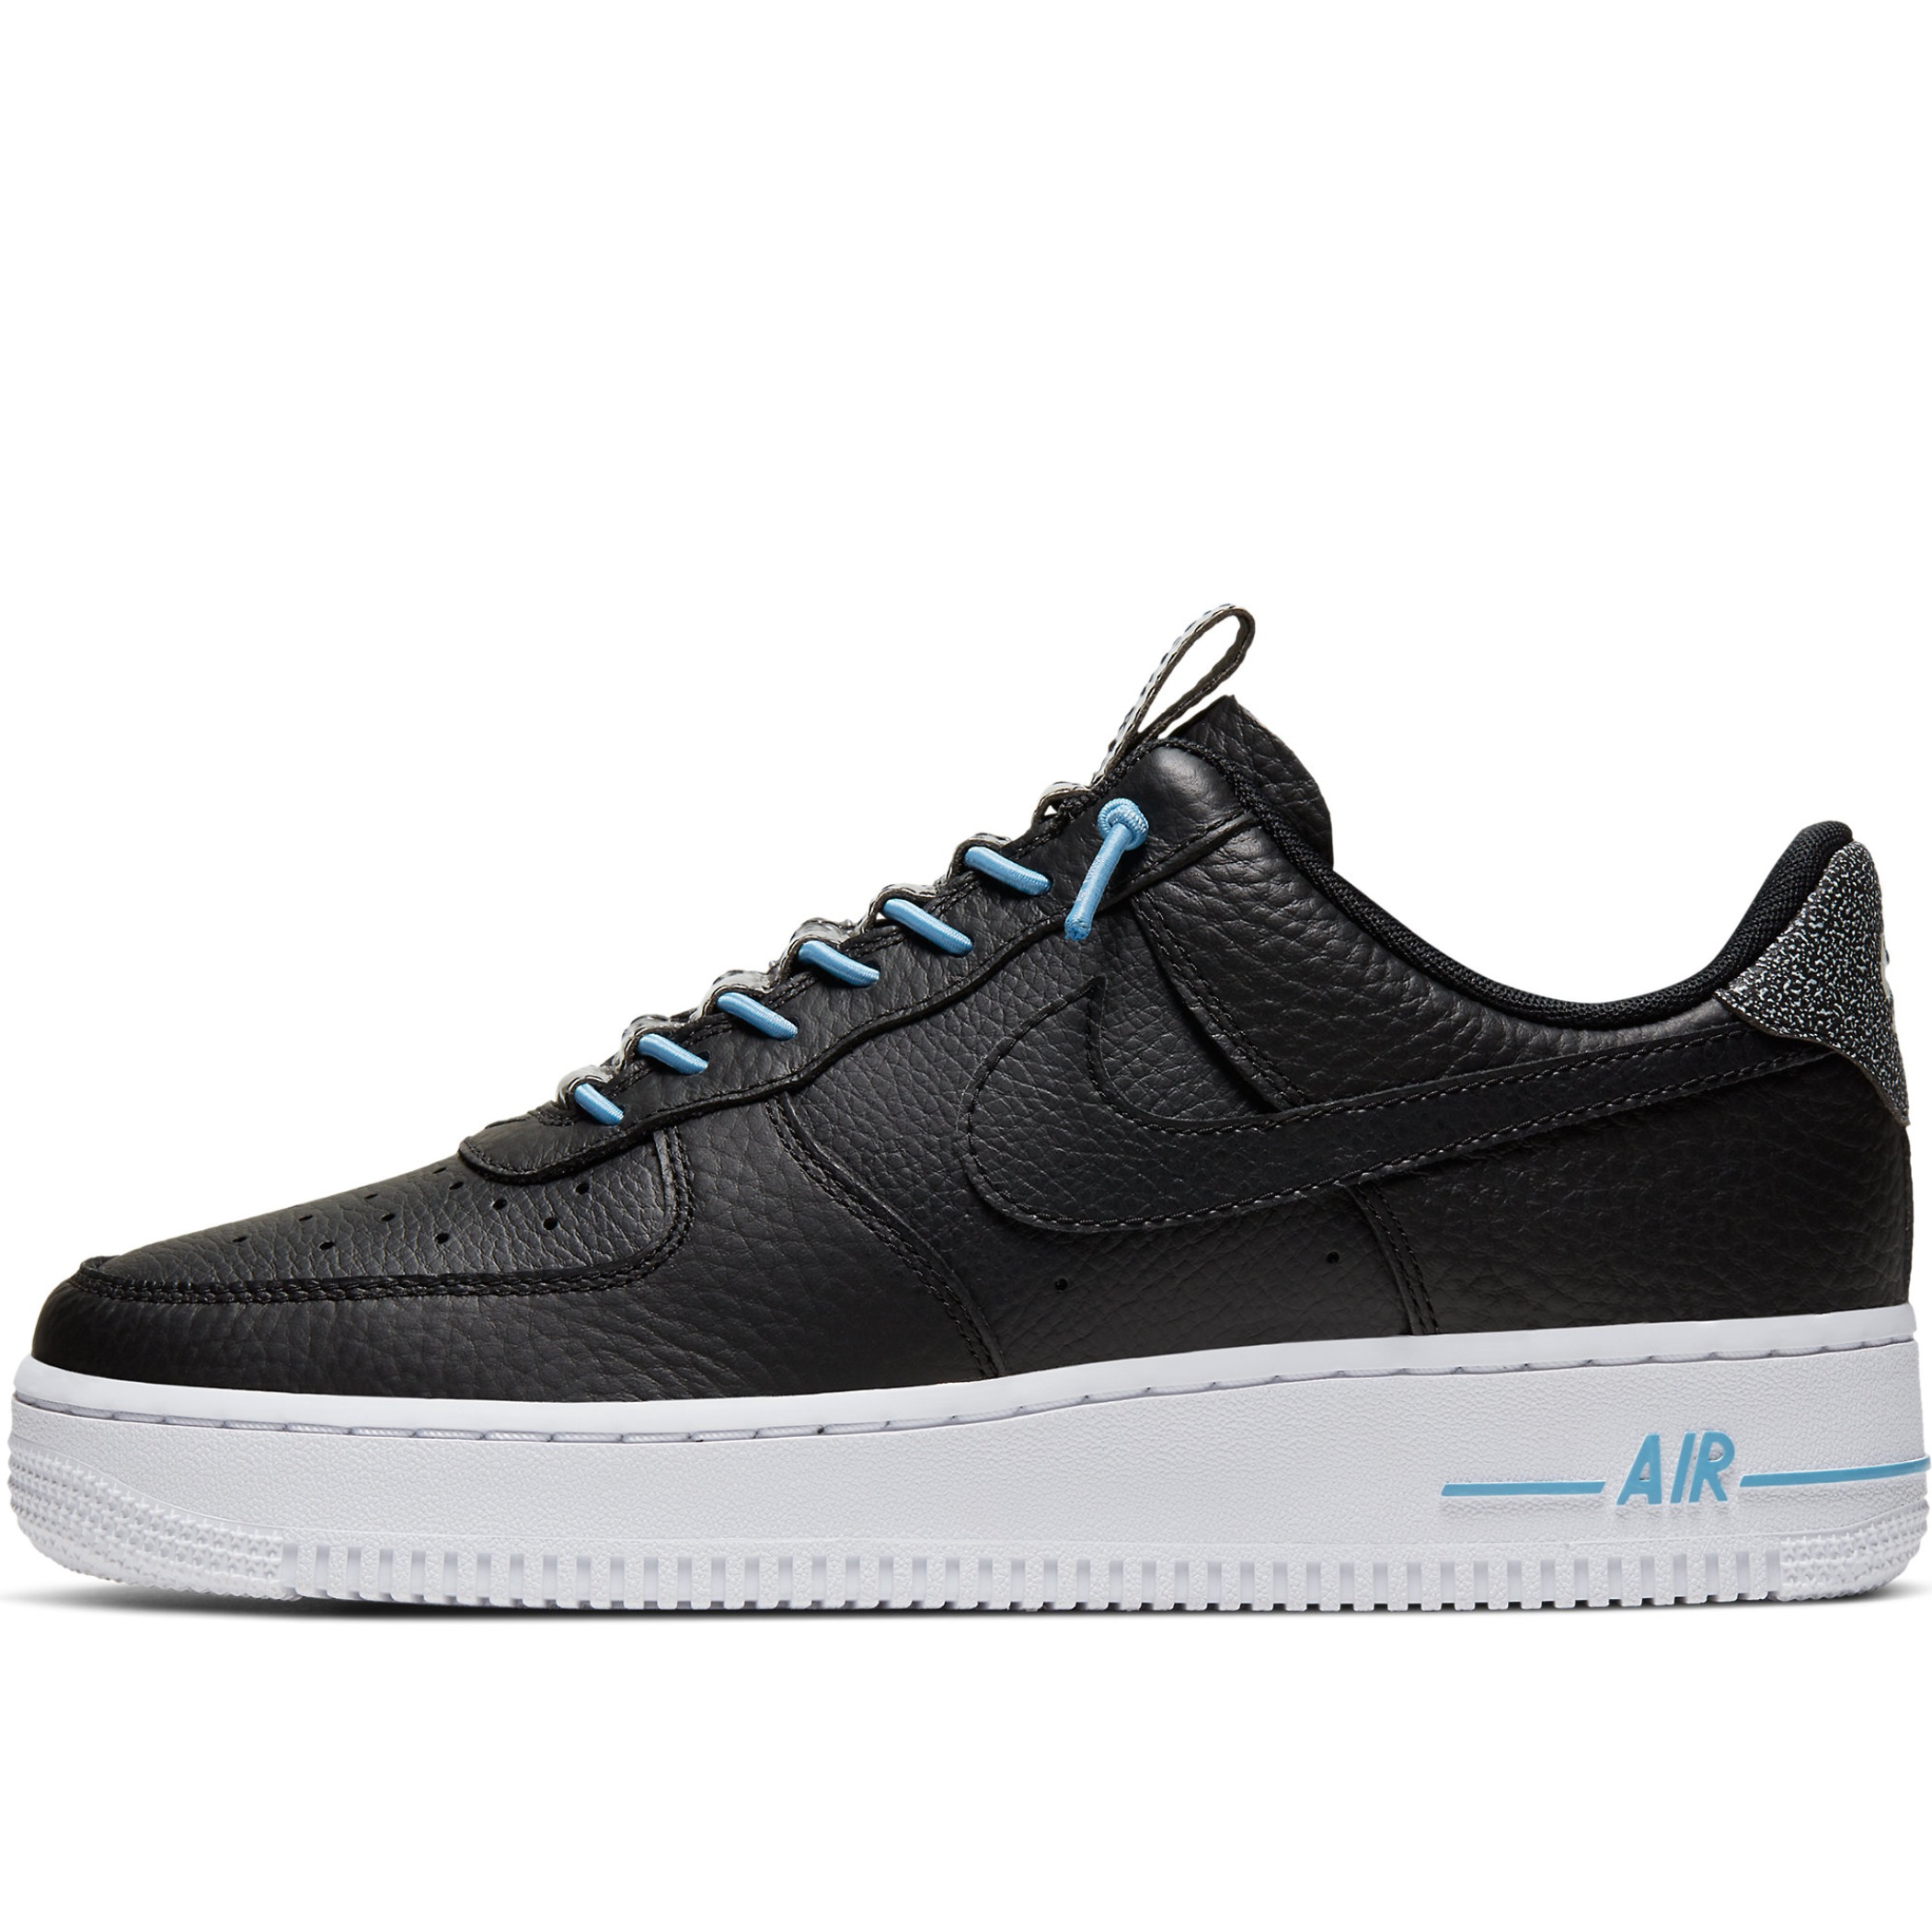 Nike Air Force 1 '07 Lux 898889-015 